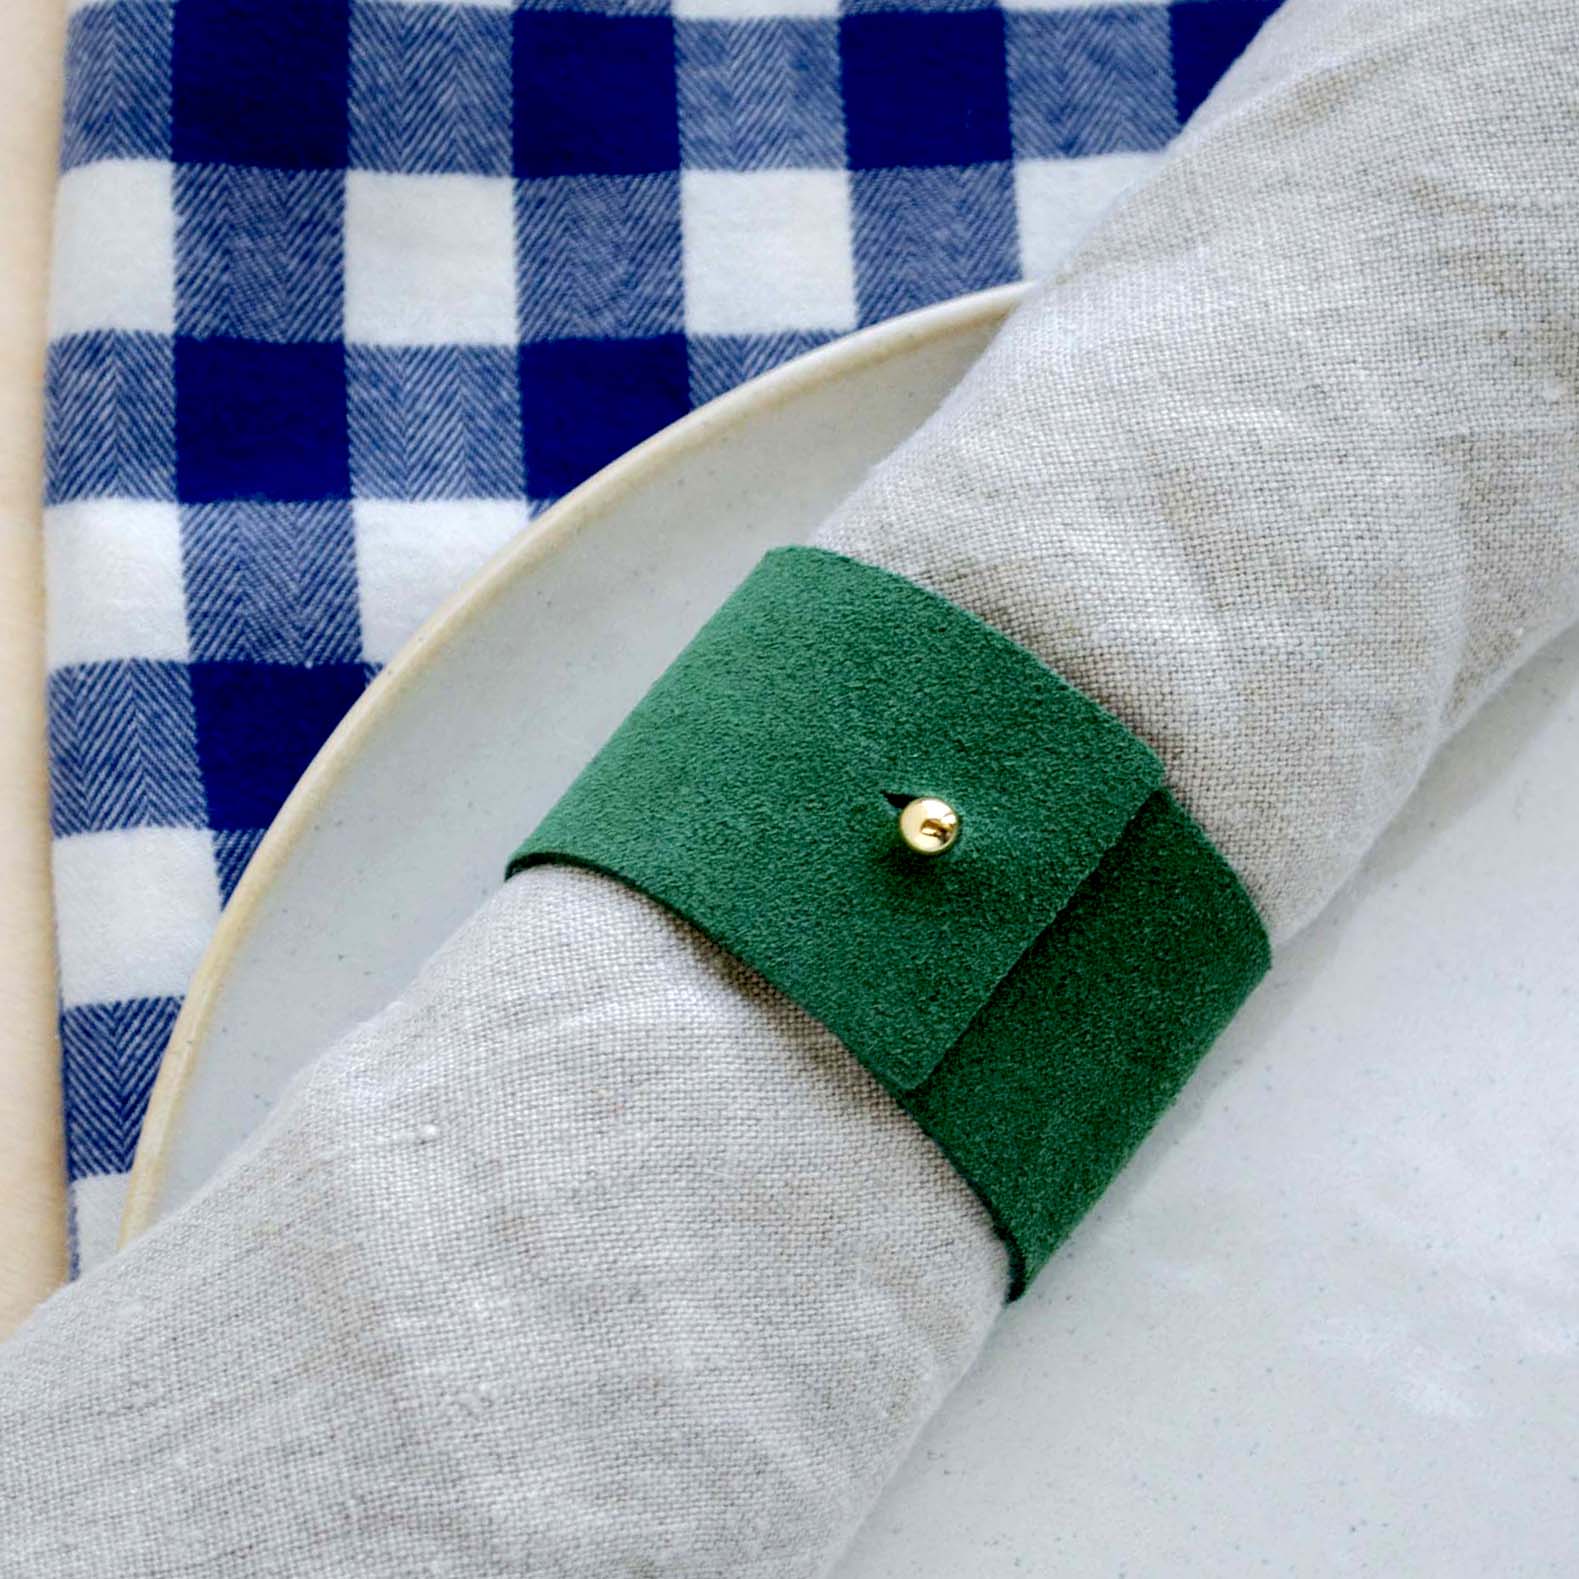 Moss green suede napkin ring with gold stud on a stoneware plate and a blue gingham table cloth for Christmas.